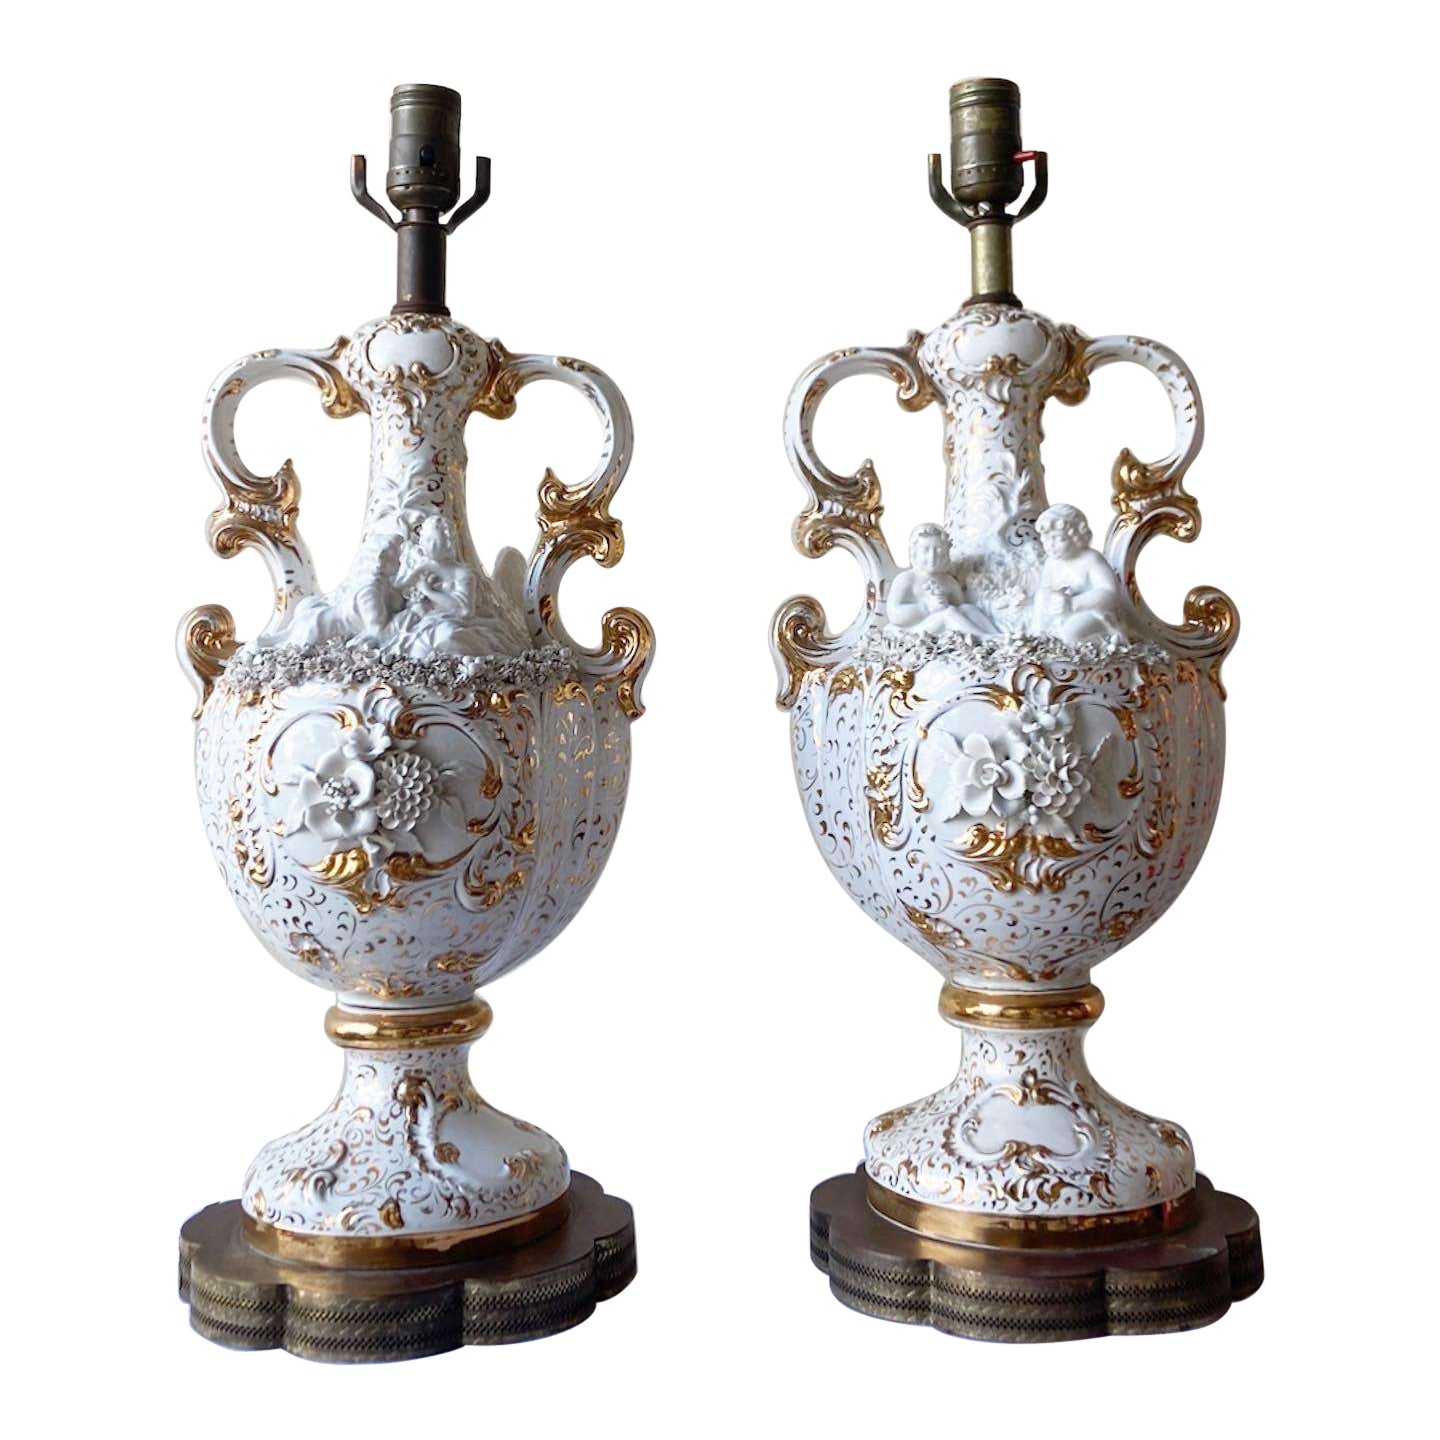 Vintage Ceramic White and Gold Cherub Trophy Table Lamps - a Pair For Sale